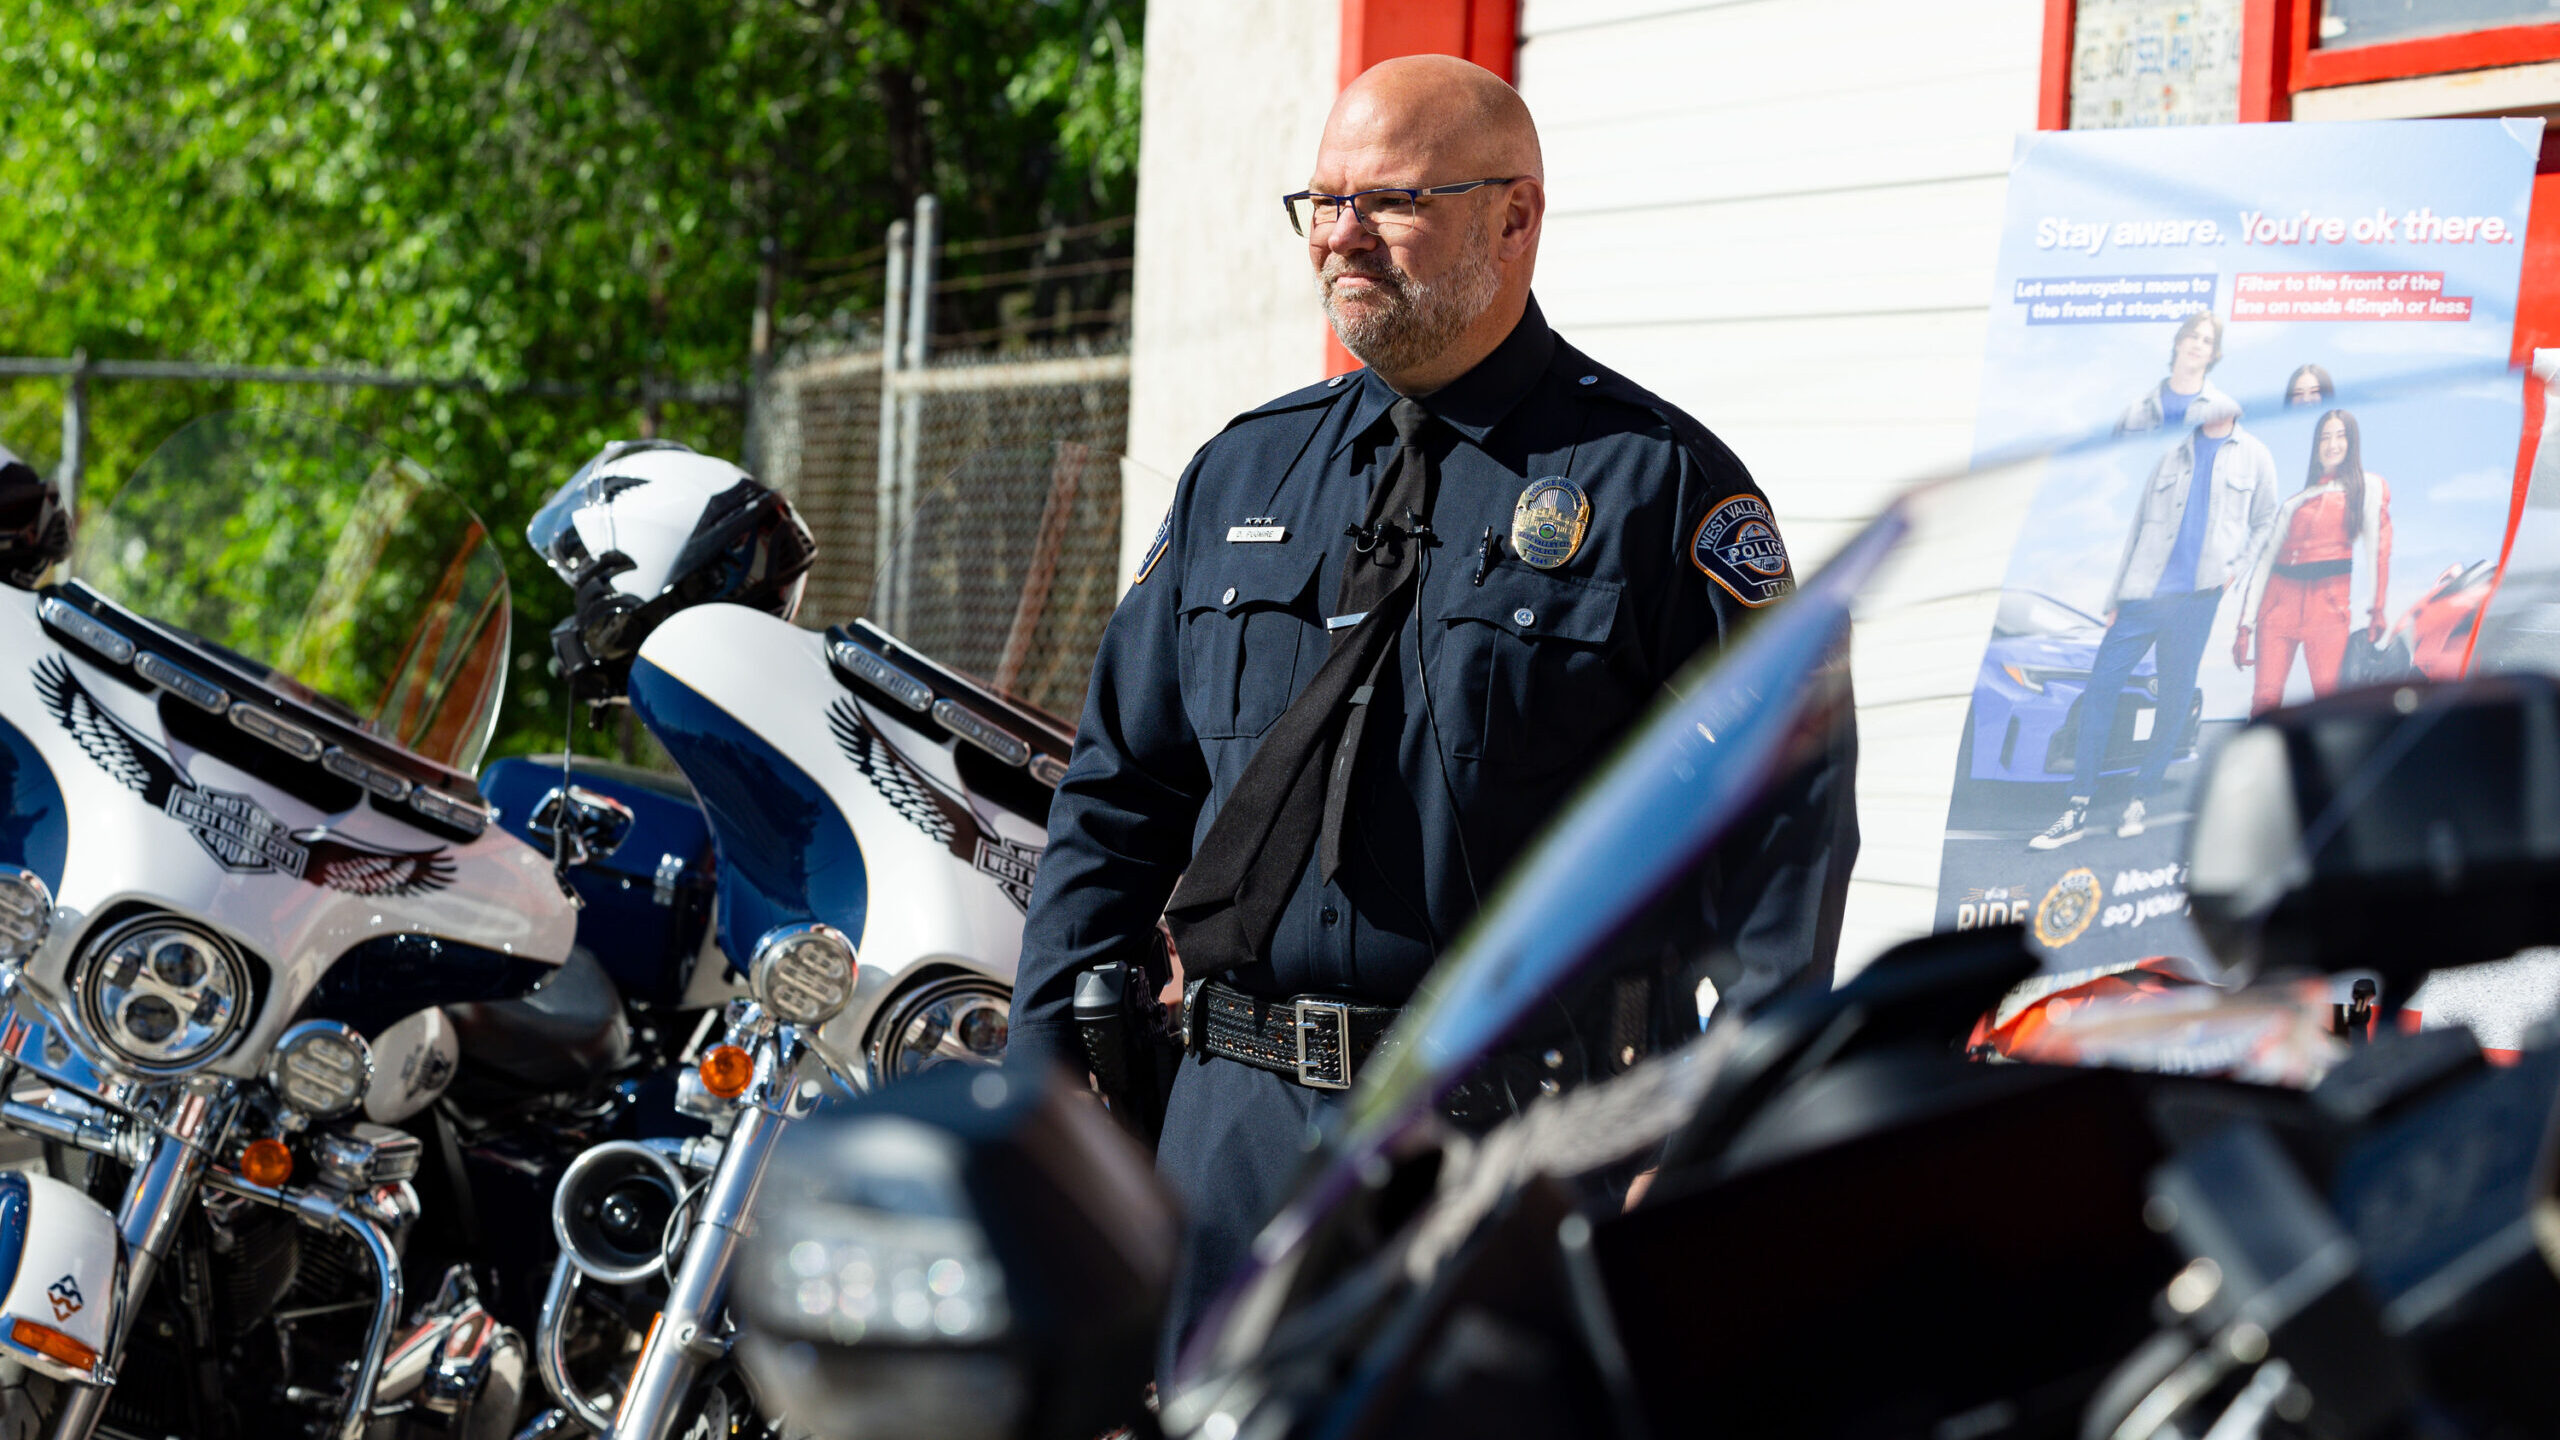 Officer Dana Pugmire, West Valley City Police Department, speaks to the press about a motorcycle ac...